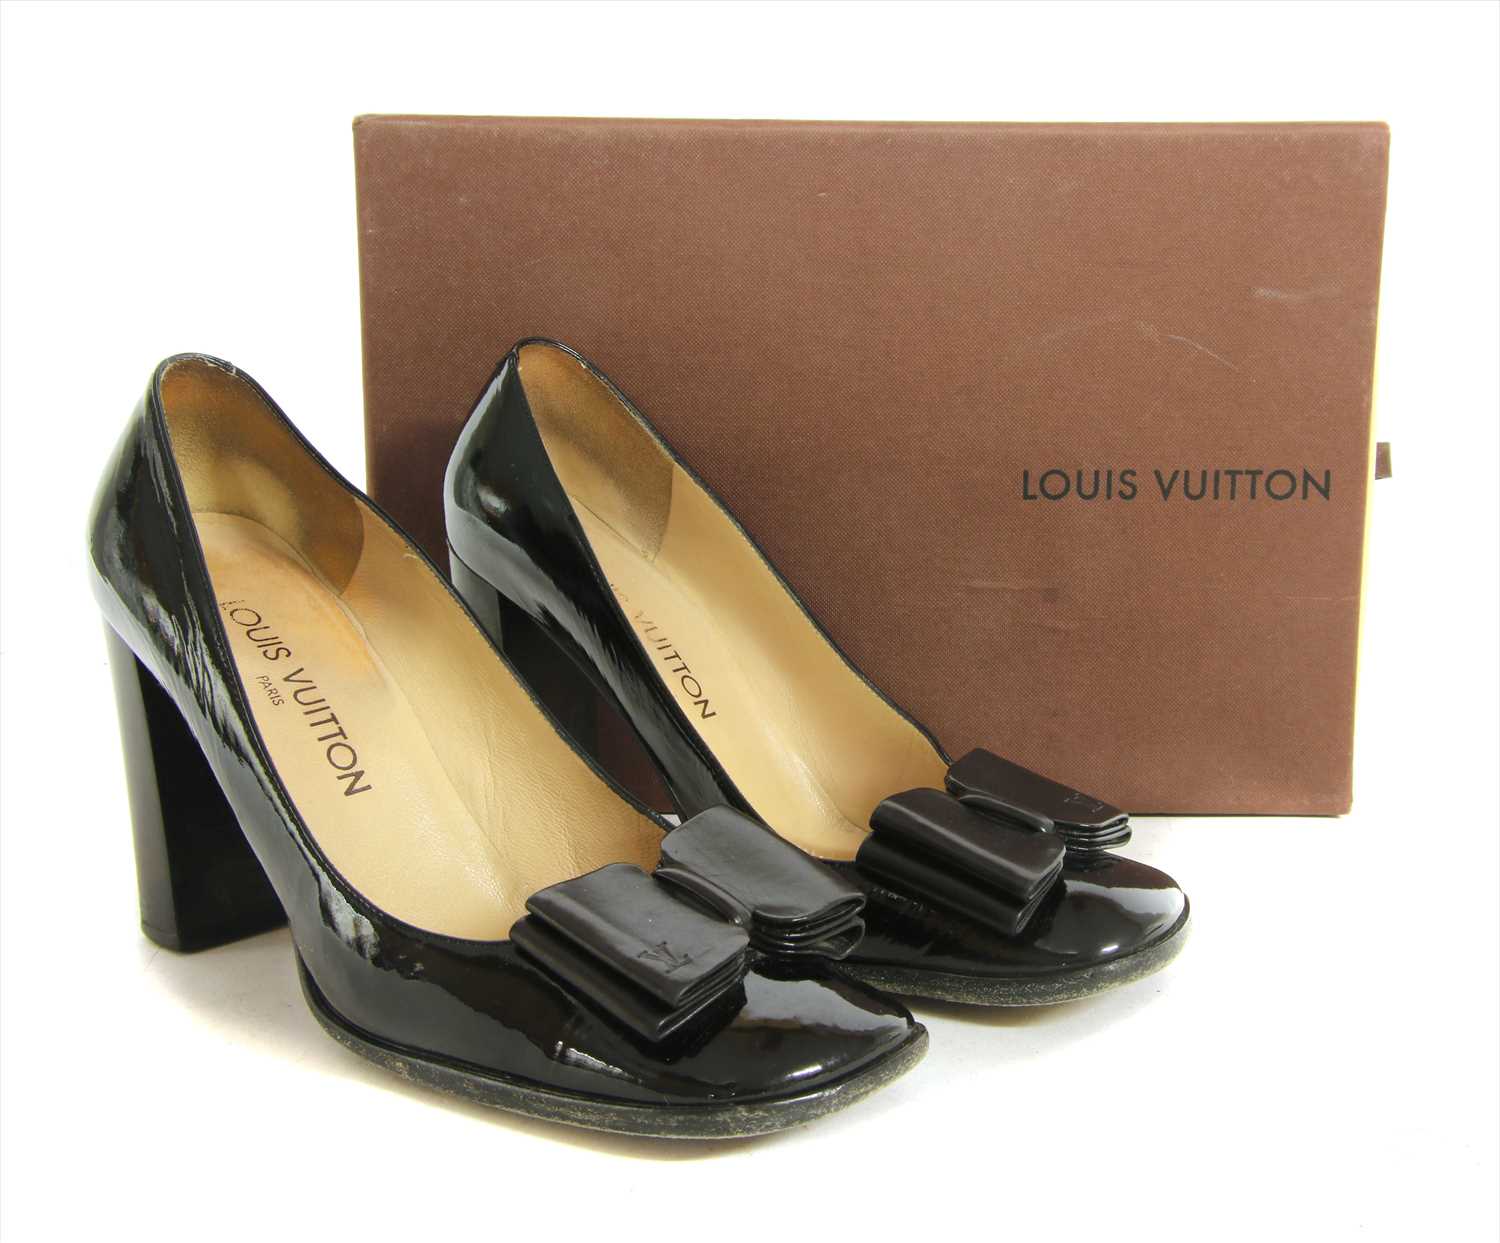 Lot 1039 - A pair of Louis Vuitton brown patent leather court shoes